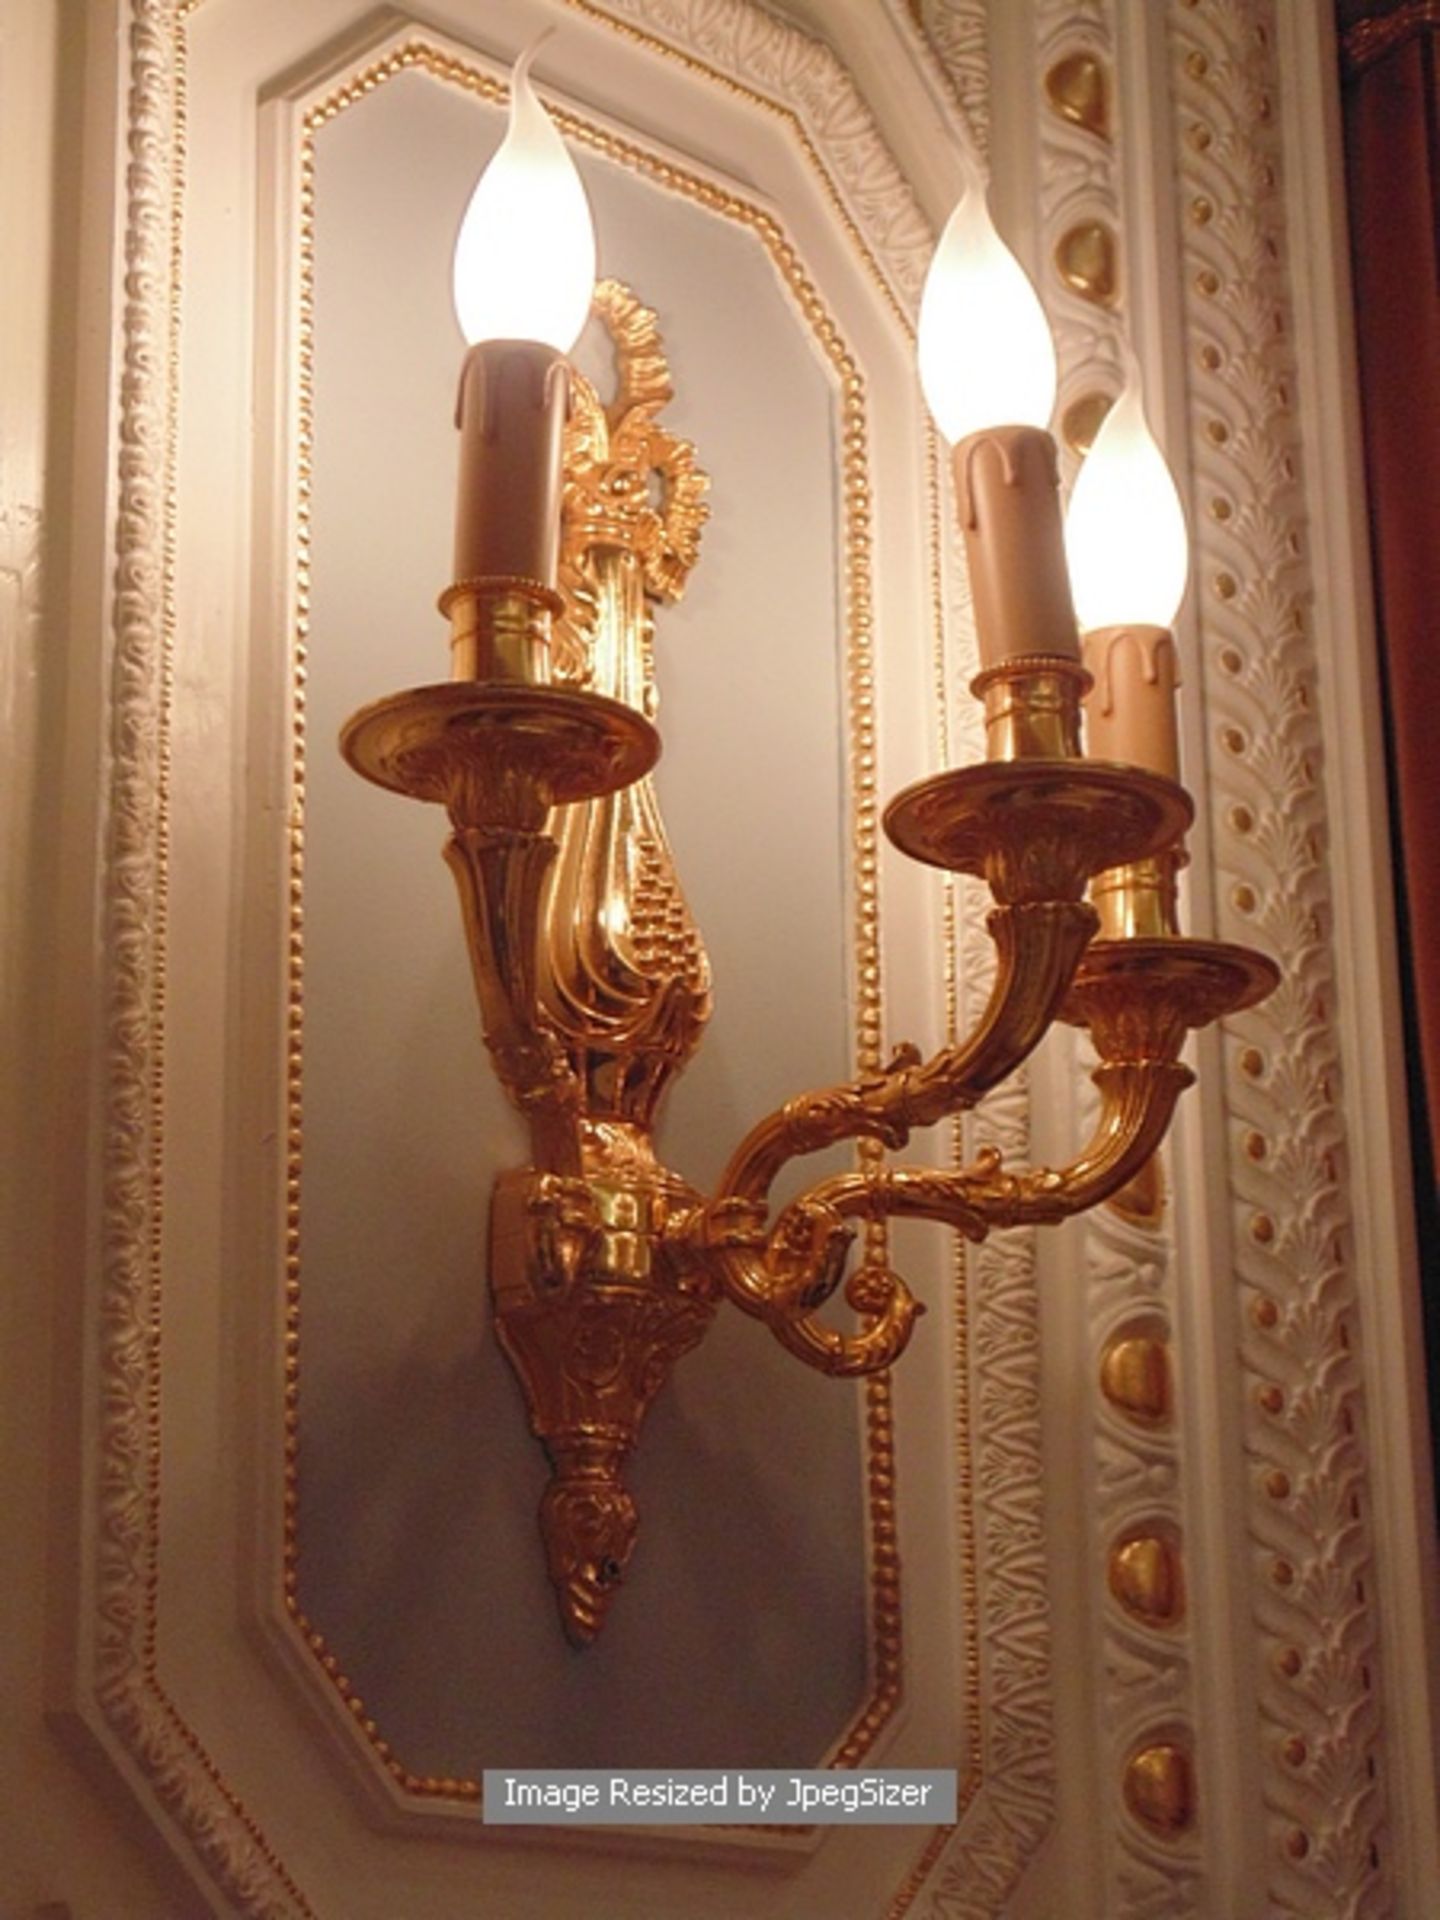 A pair of Laudarte wall sconces three candle wall light, bronze castings gold 24K finish 380mm x